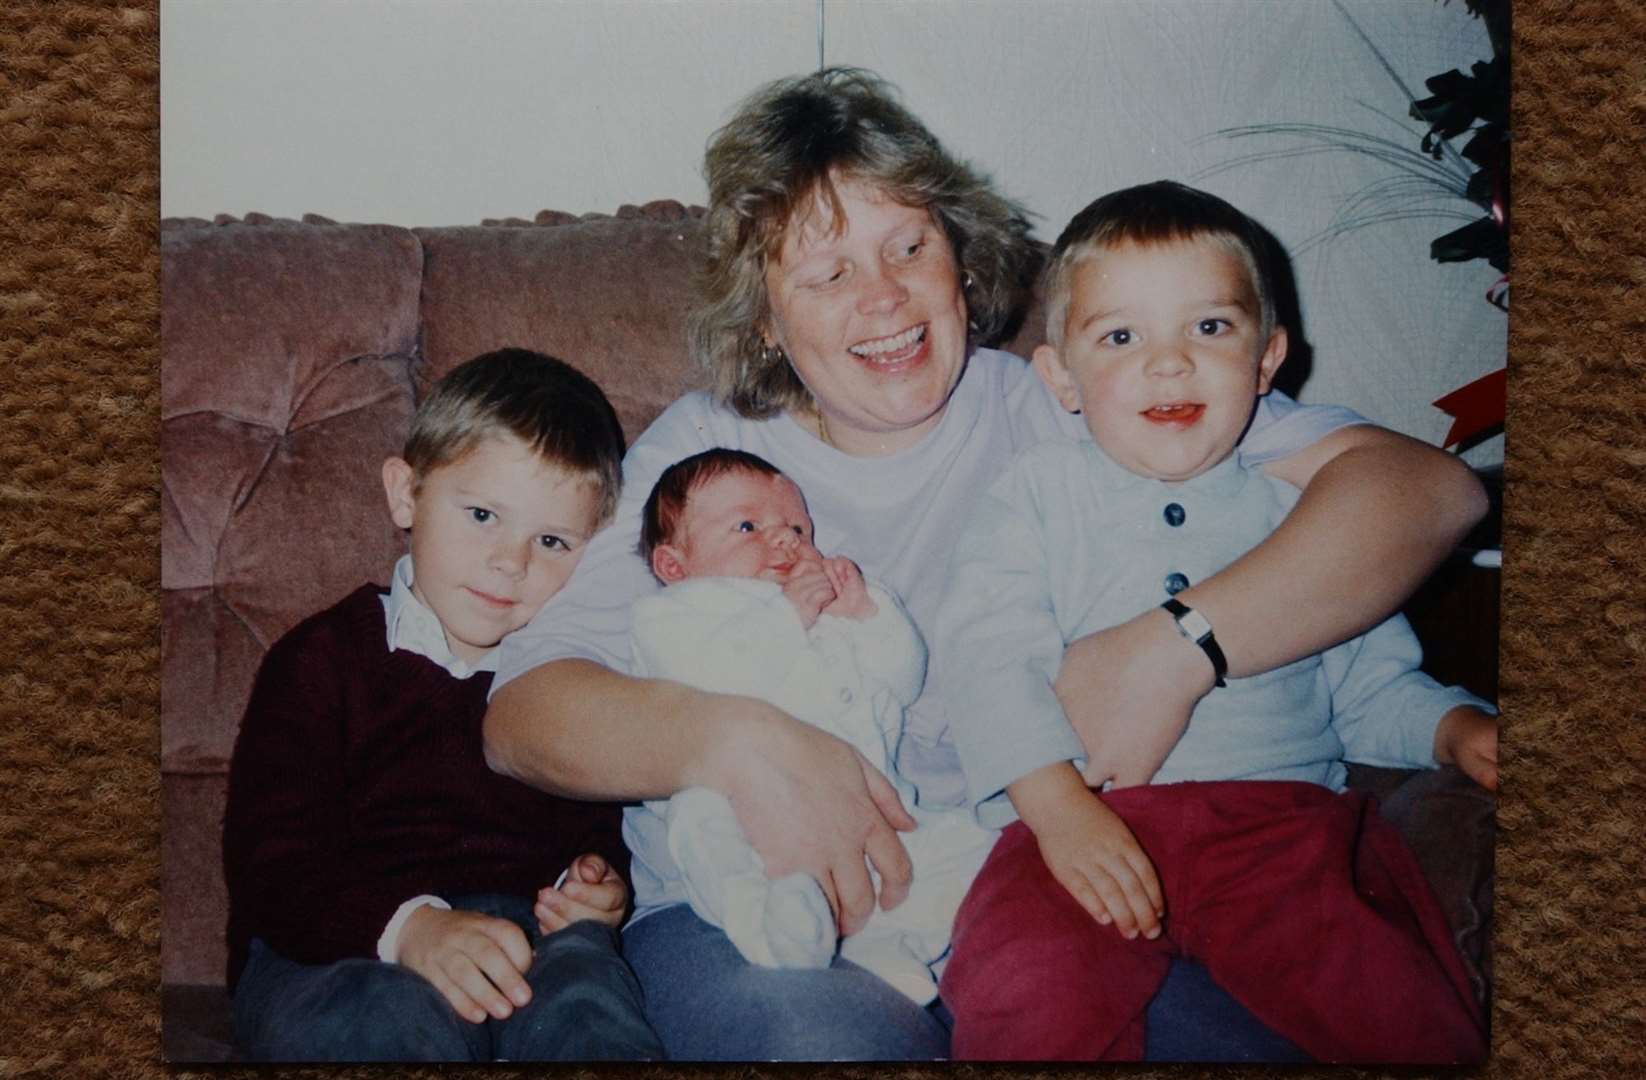 Pregnant Debbie Griggs was described as being a doting mother to sons Jeremy, Jake and baby Luke